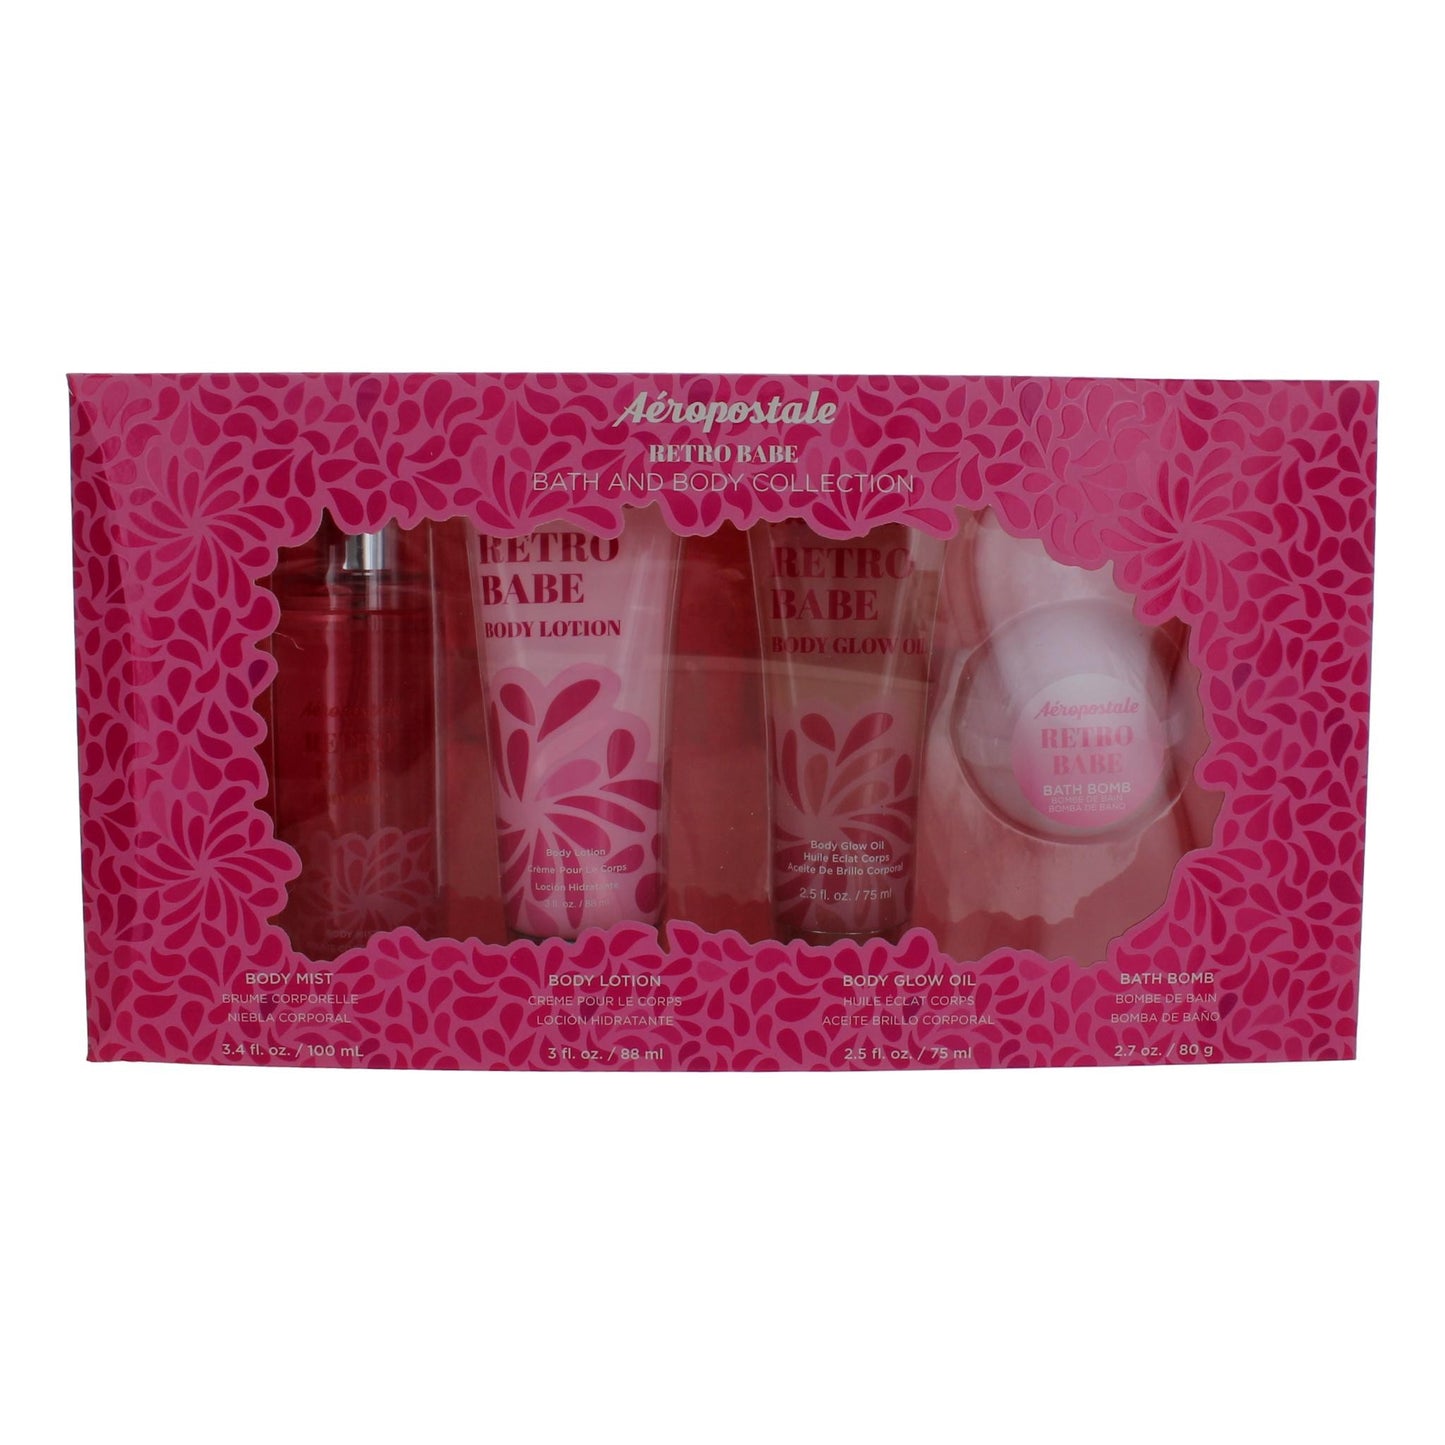 Bottle of Aeropostale Retro Babe by Aeropostale, 4 Piece Bath and Body Collection